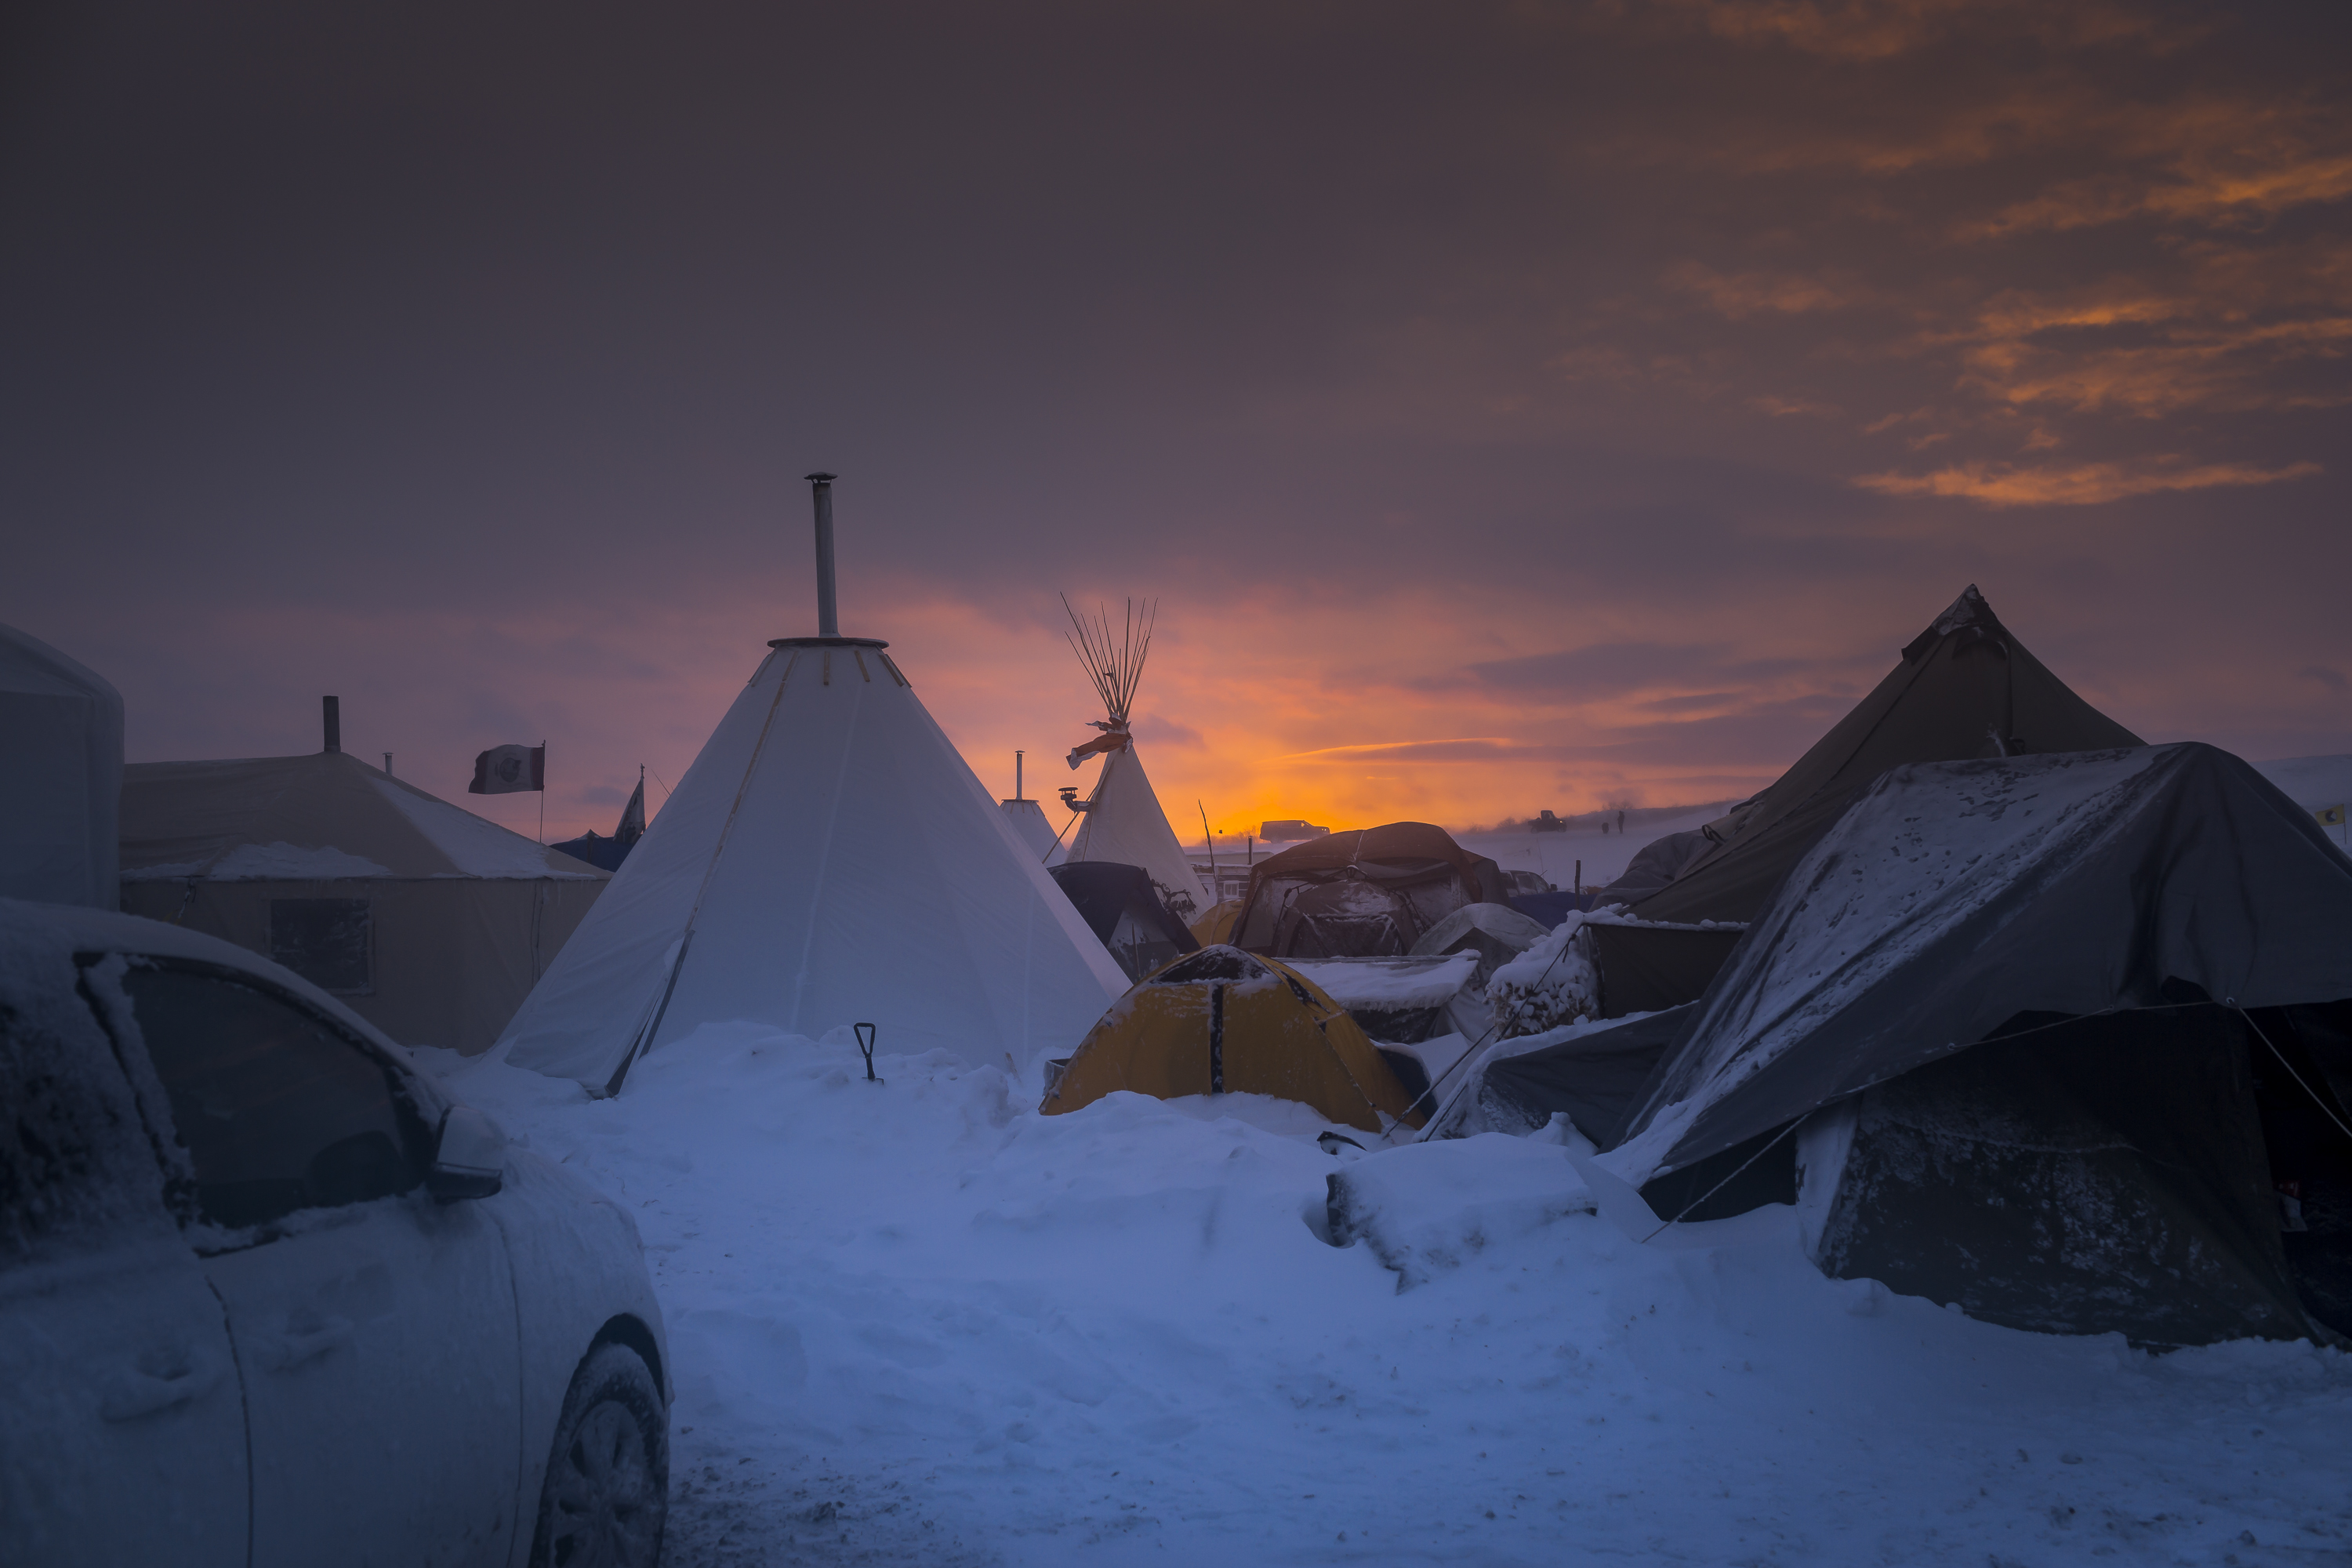 Winter arrives in Standing Rock at the Oceti Sakowin Camp in North Dakota, the day after the Army Corps of Engineers denied the easement needed to build the pipeline. (Michael Nigro—Pacific Press/LightRocket/Getty Images)